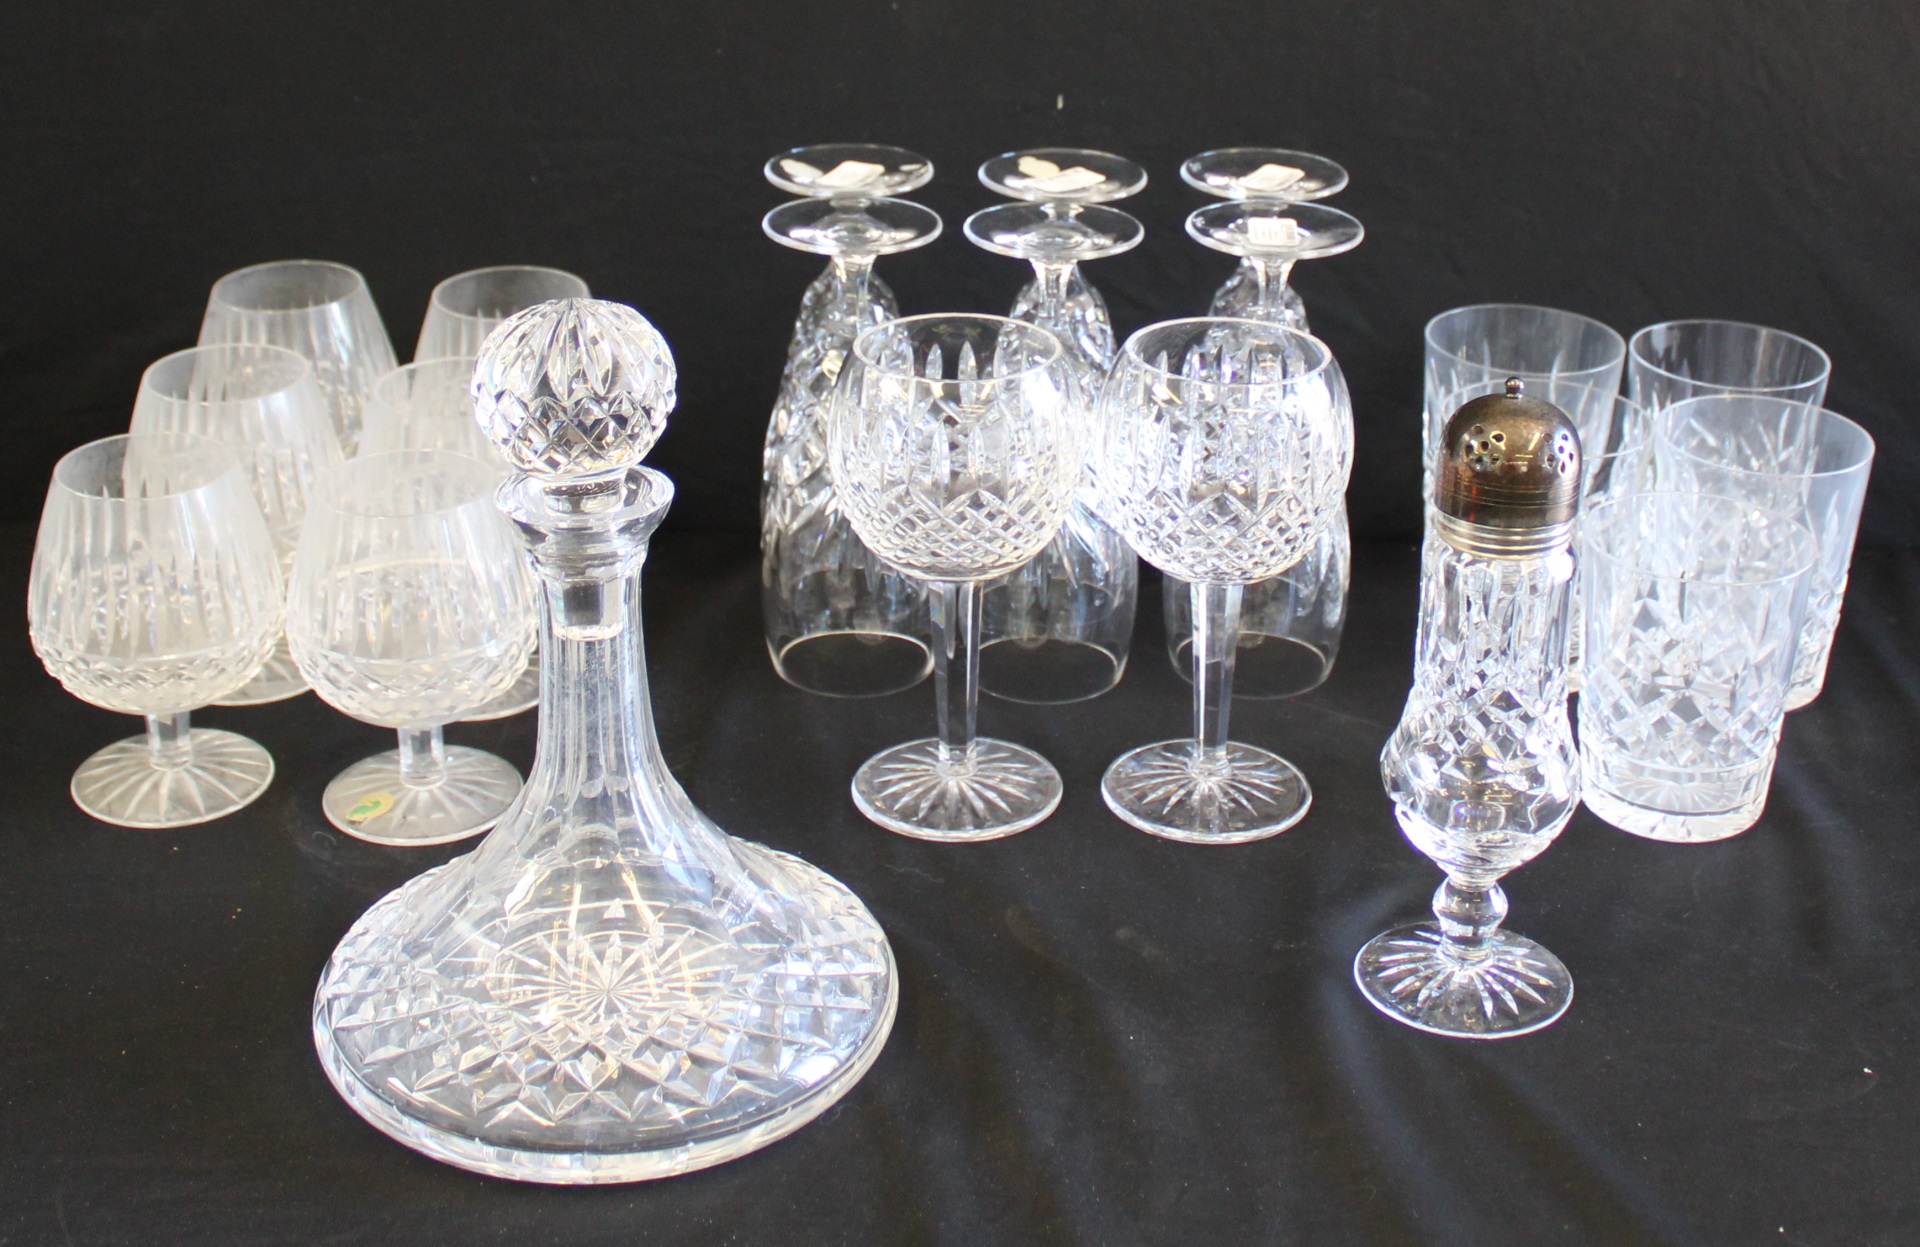 WATERFORD CUT GLASSES A DECANTER 3bd6e3